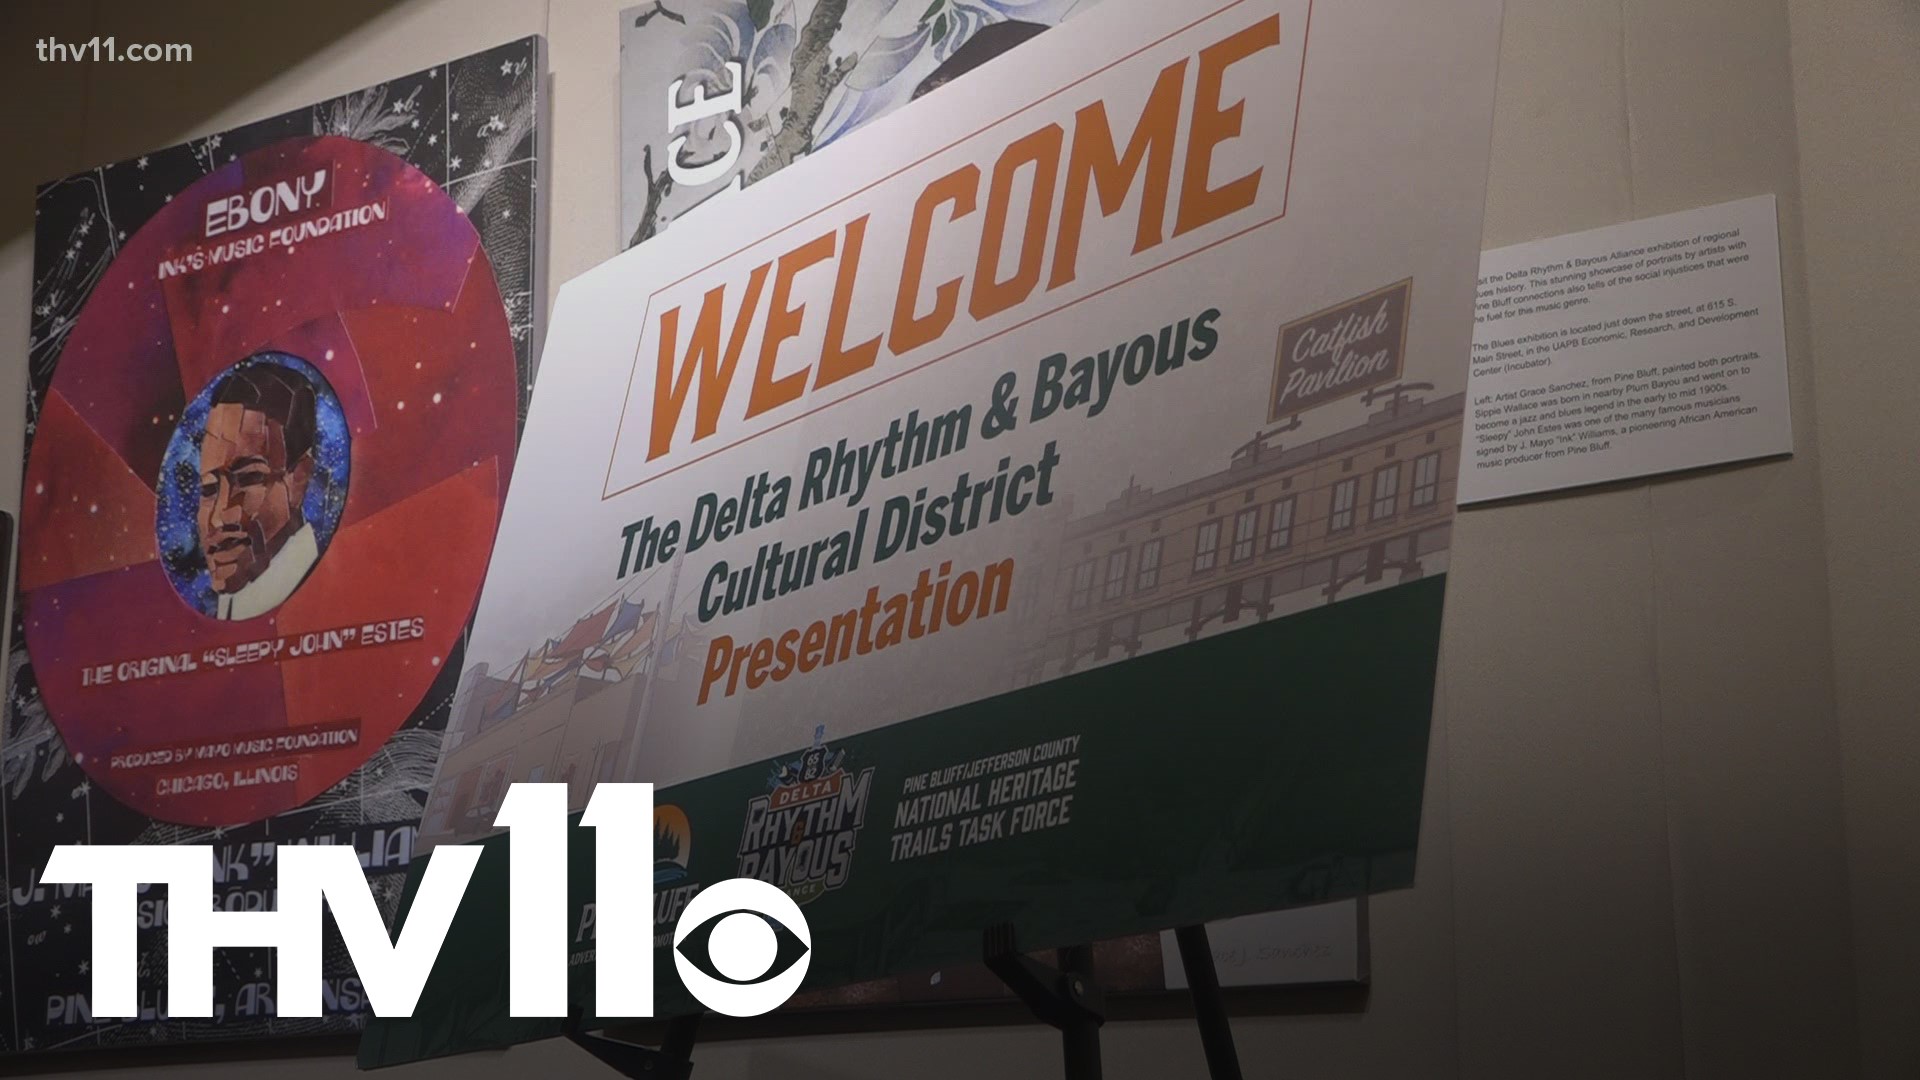 City officials kicked off their public presentation of the first and second phases of a new cultural district for the city Thursday evening.